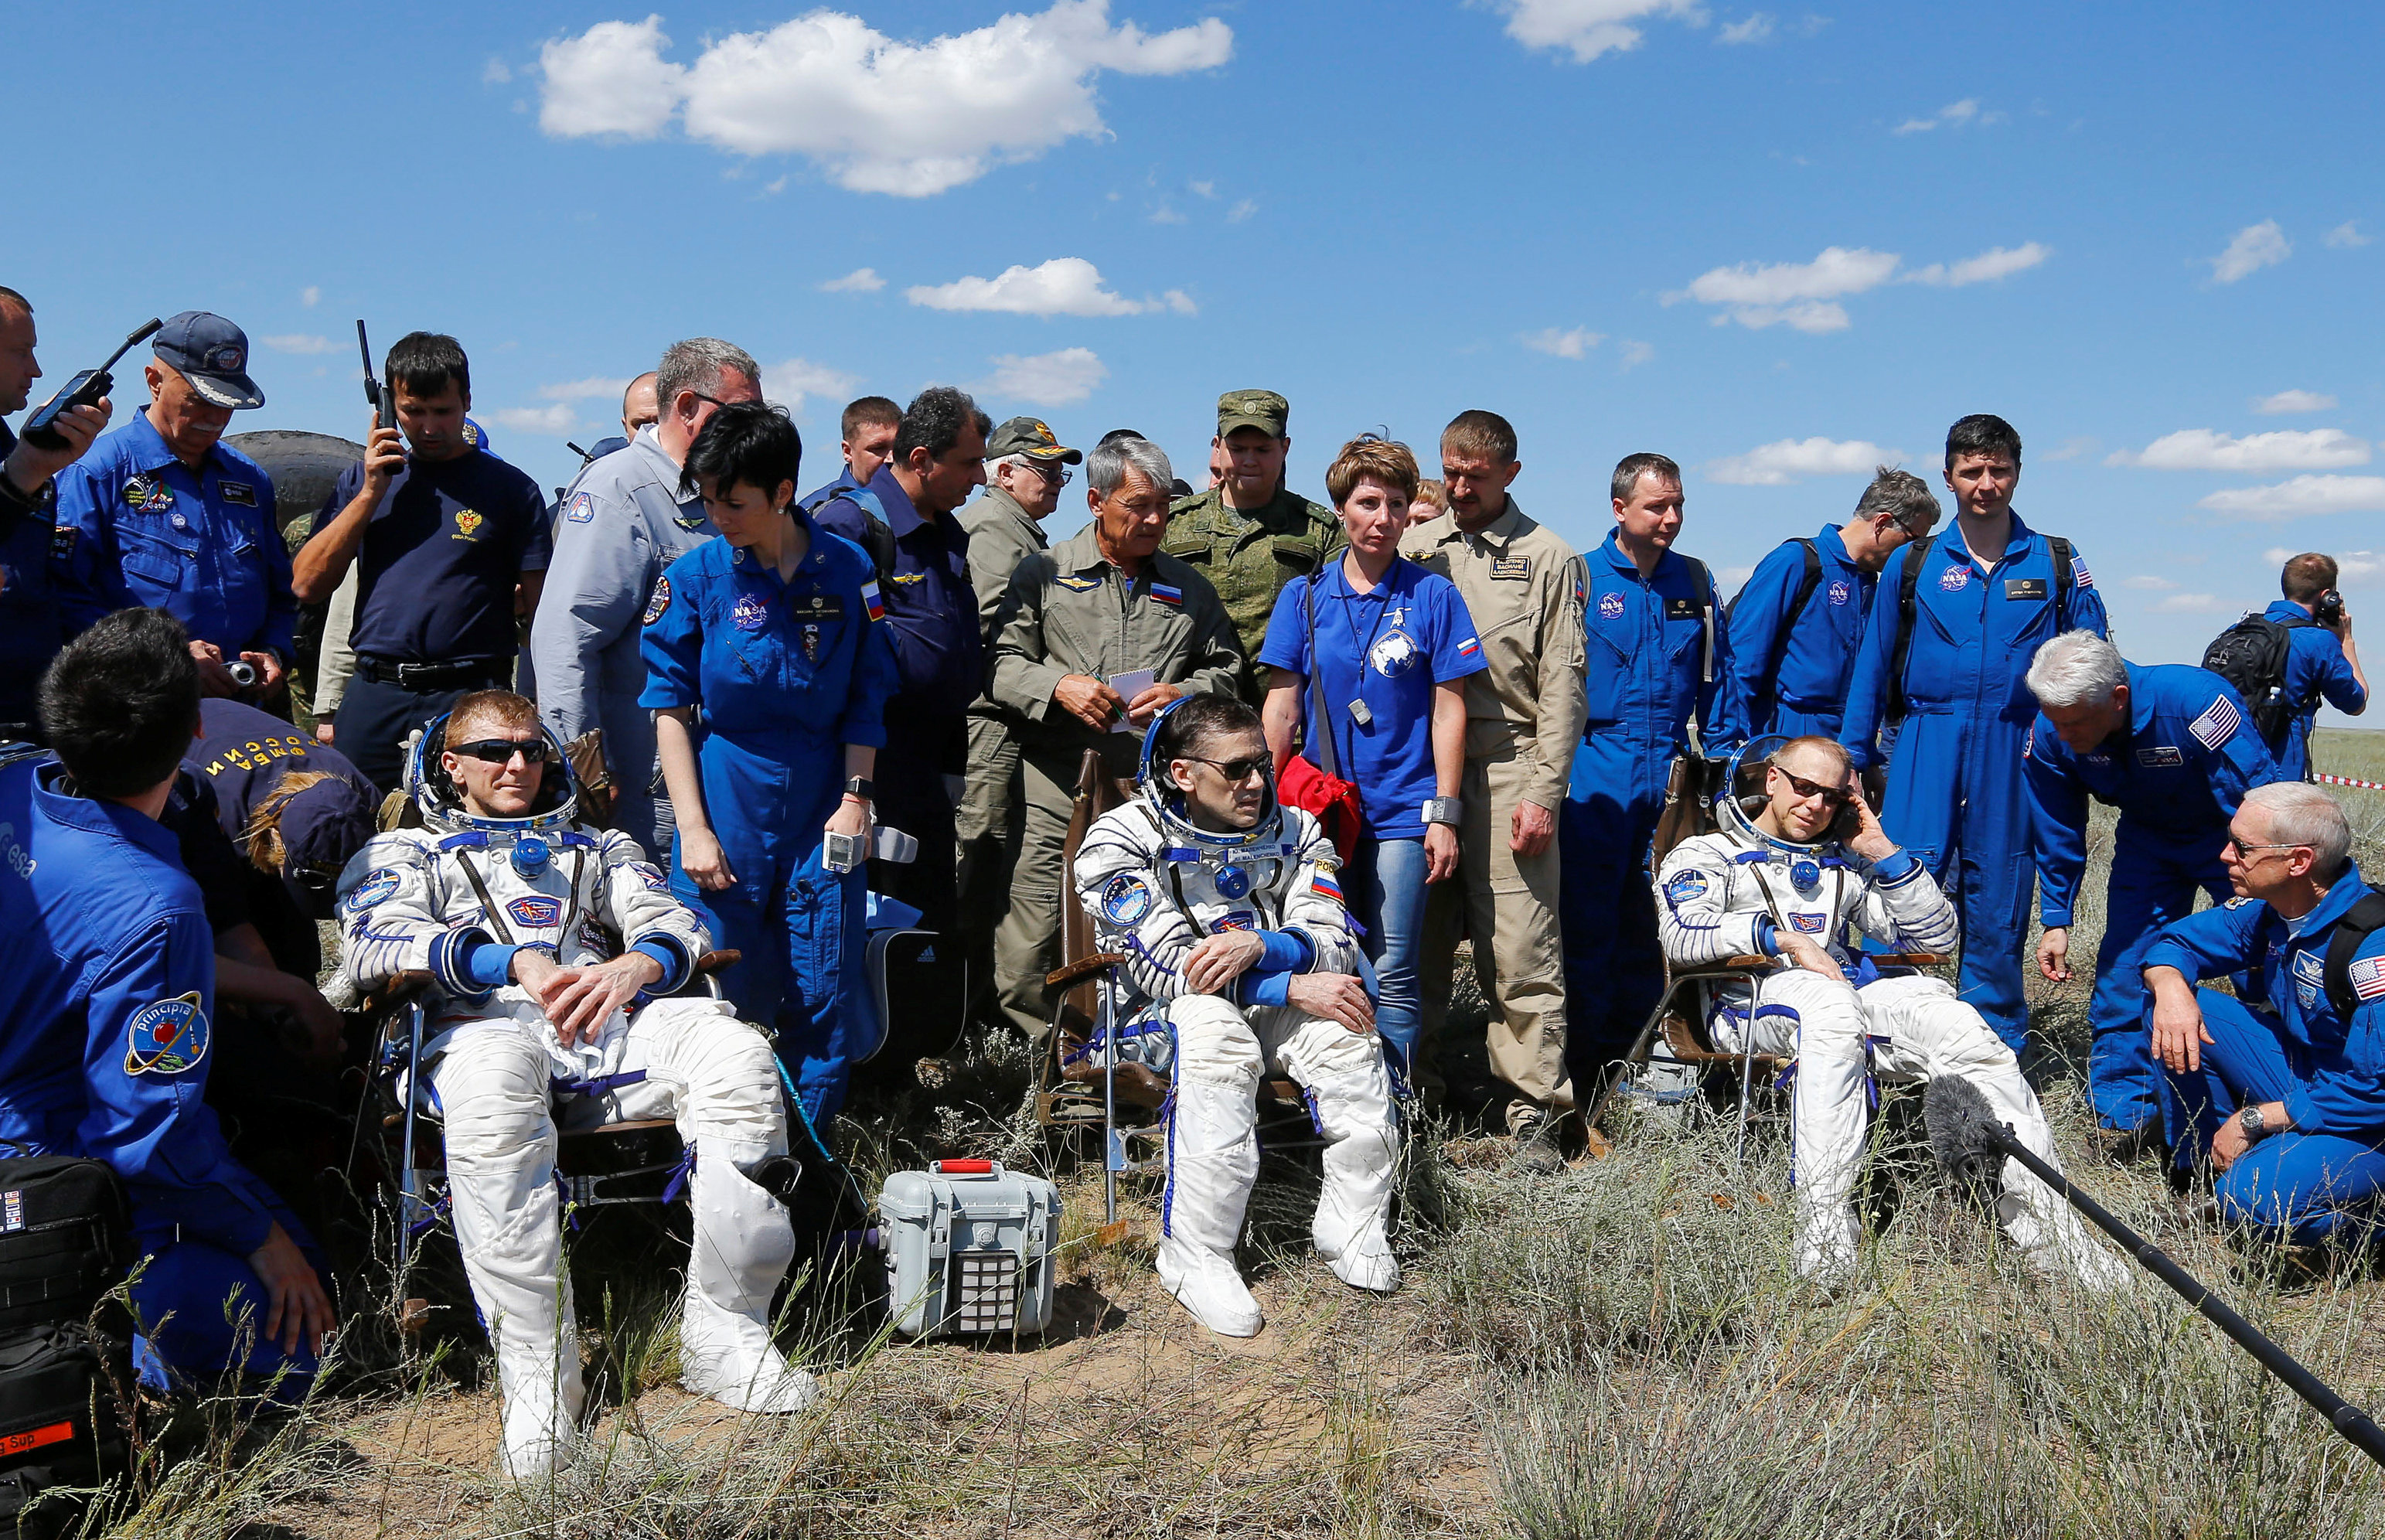 Capsule carrying space station crew lands in Kazakhstan